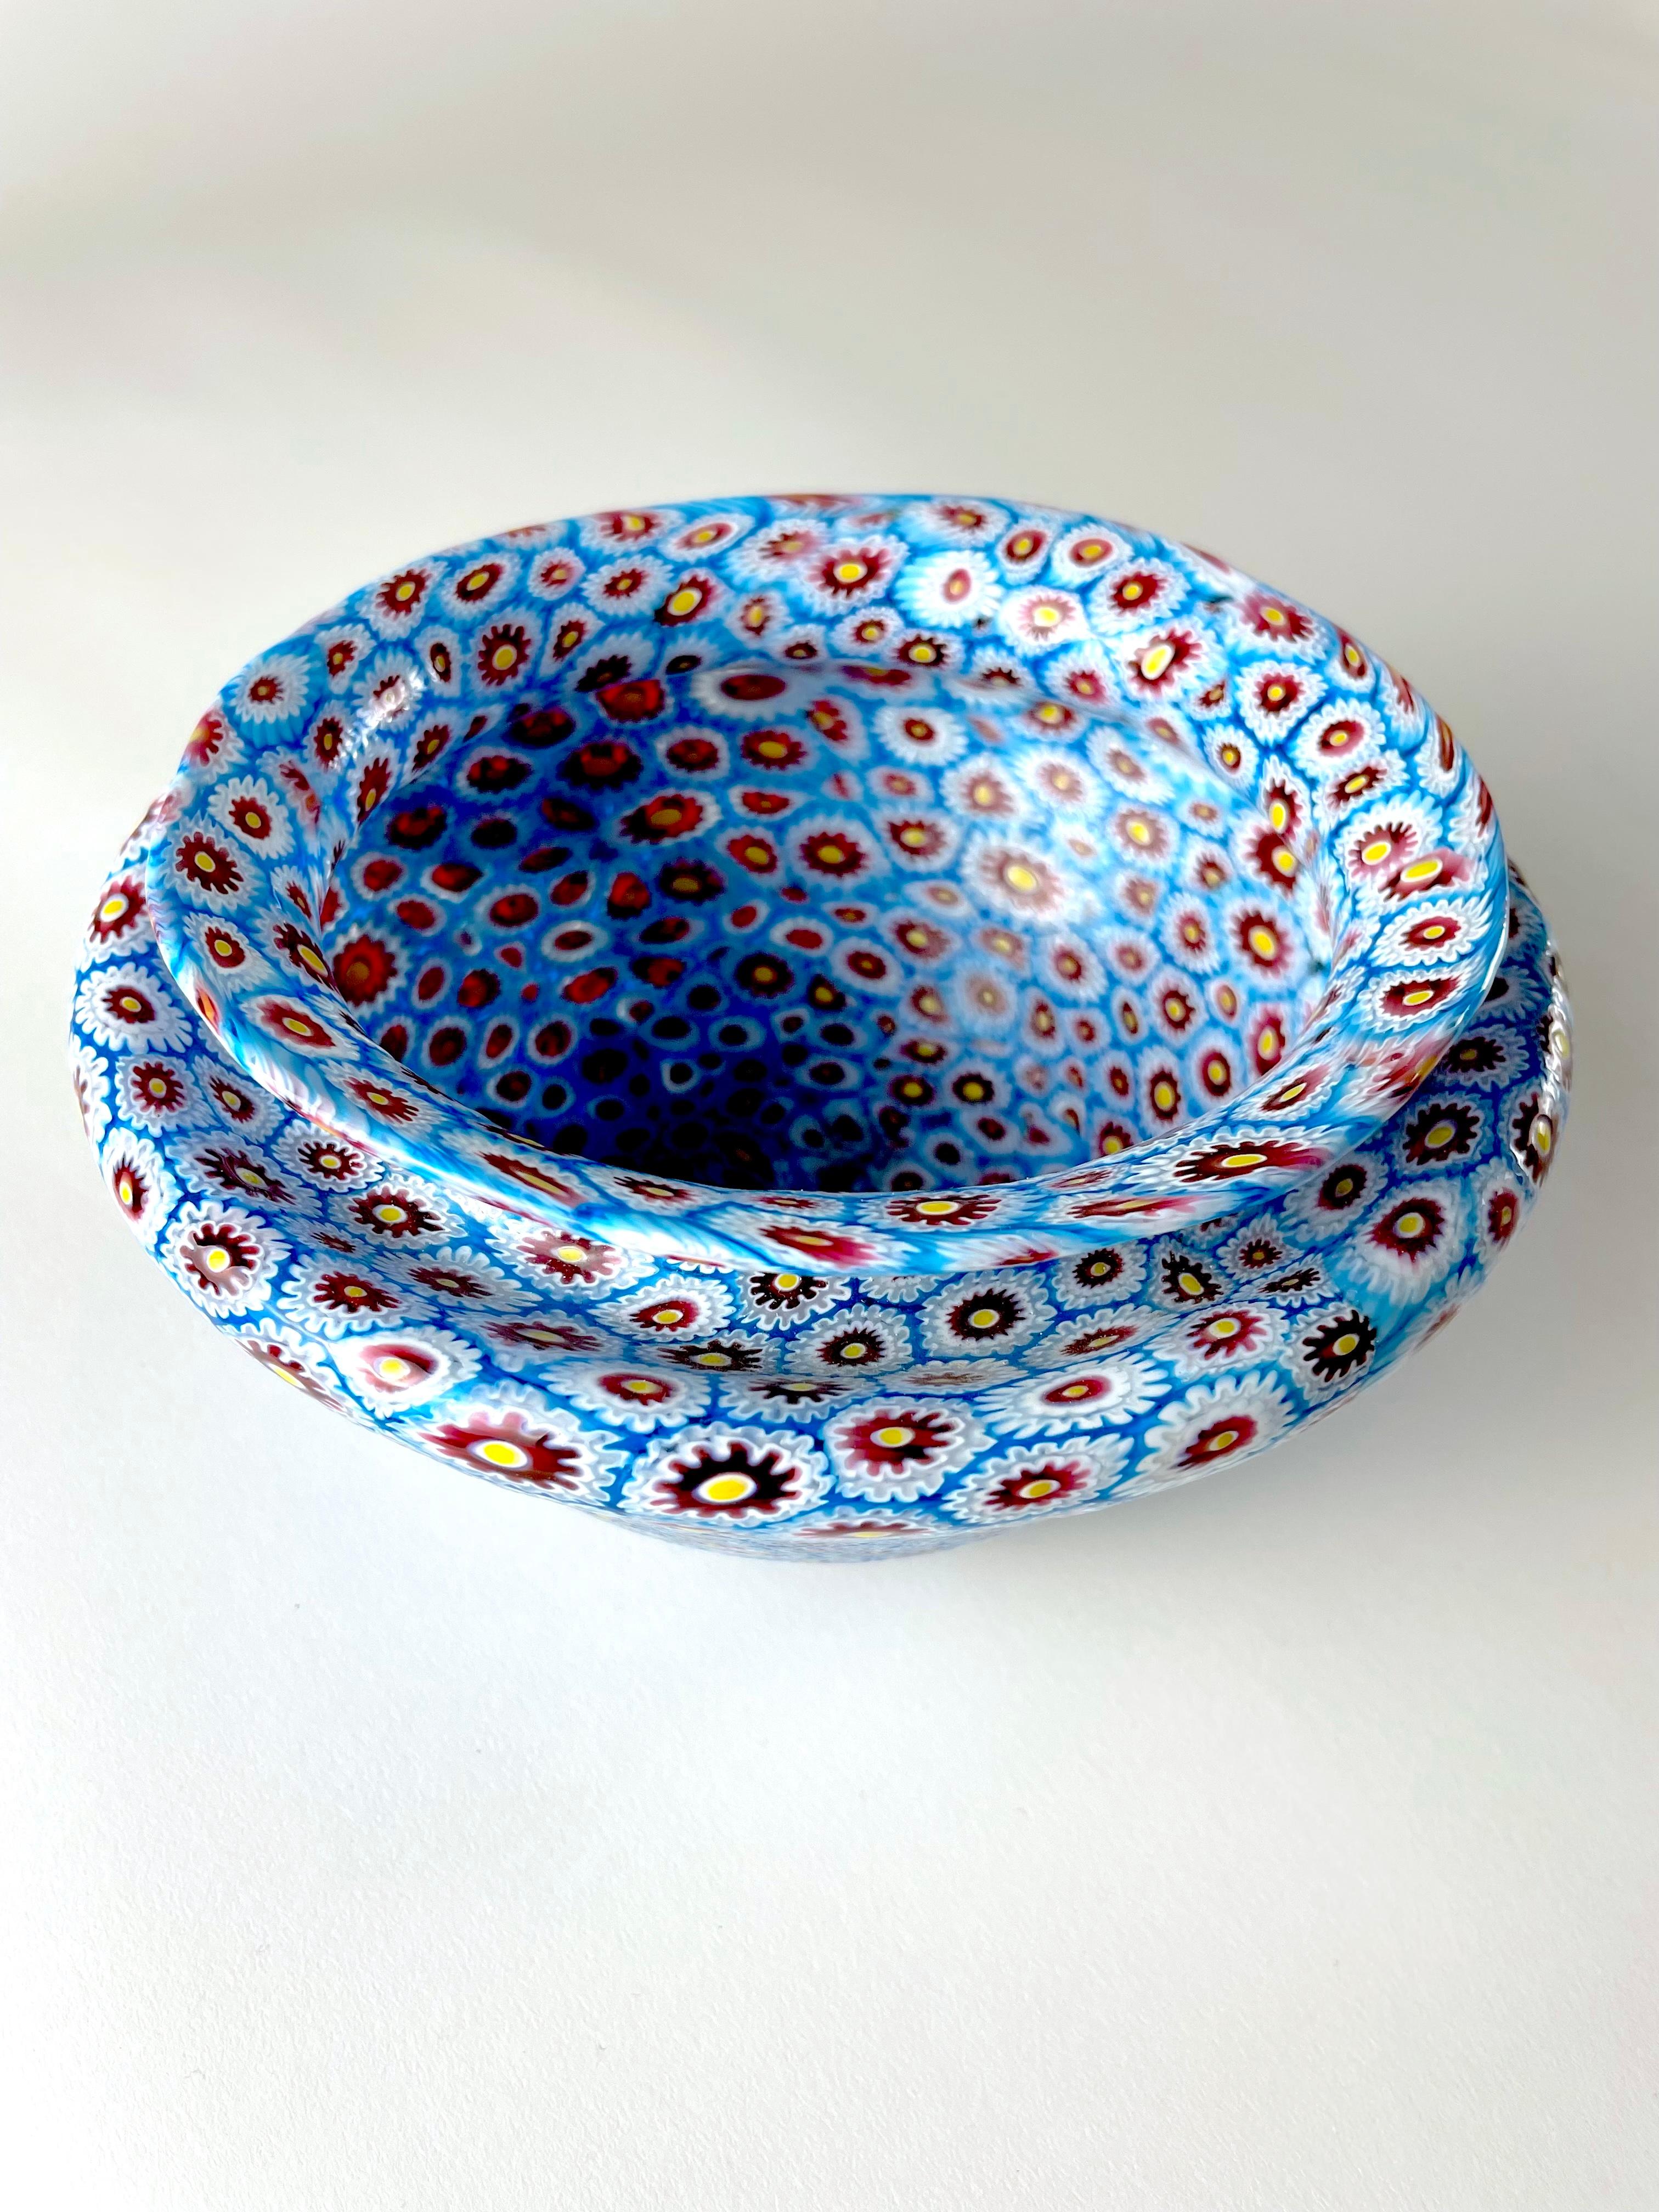 Murrina Millefiori bowl by Fratelli Toso. This classic design hails from the beginning of the '60s and showcases the true craftsmanship that made Fratelli Toso famous. This piece is meticulously crafted using the murrina technique, making it a